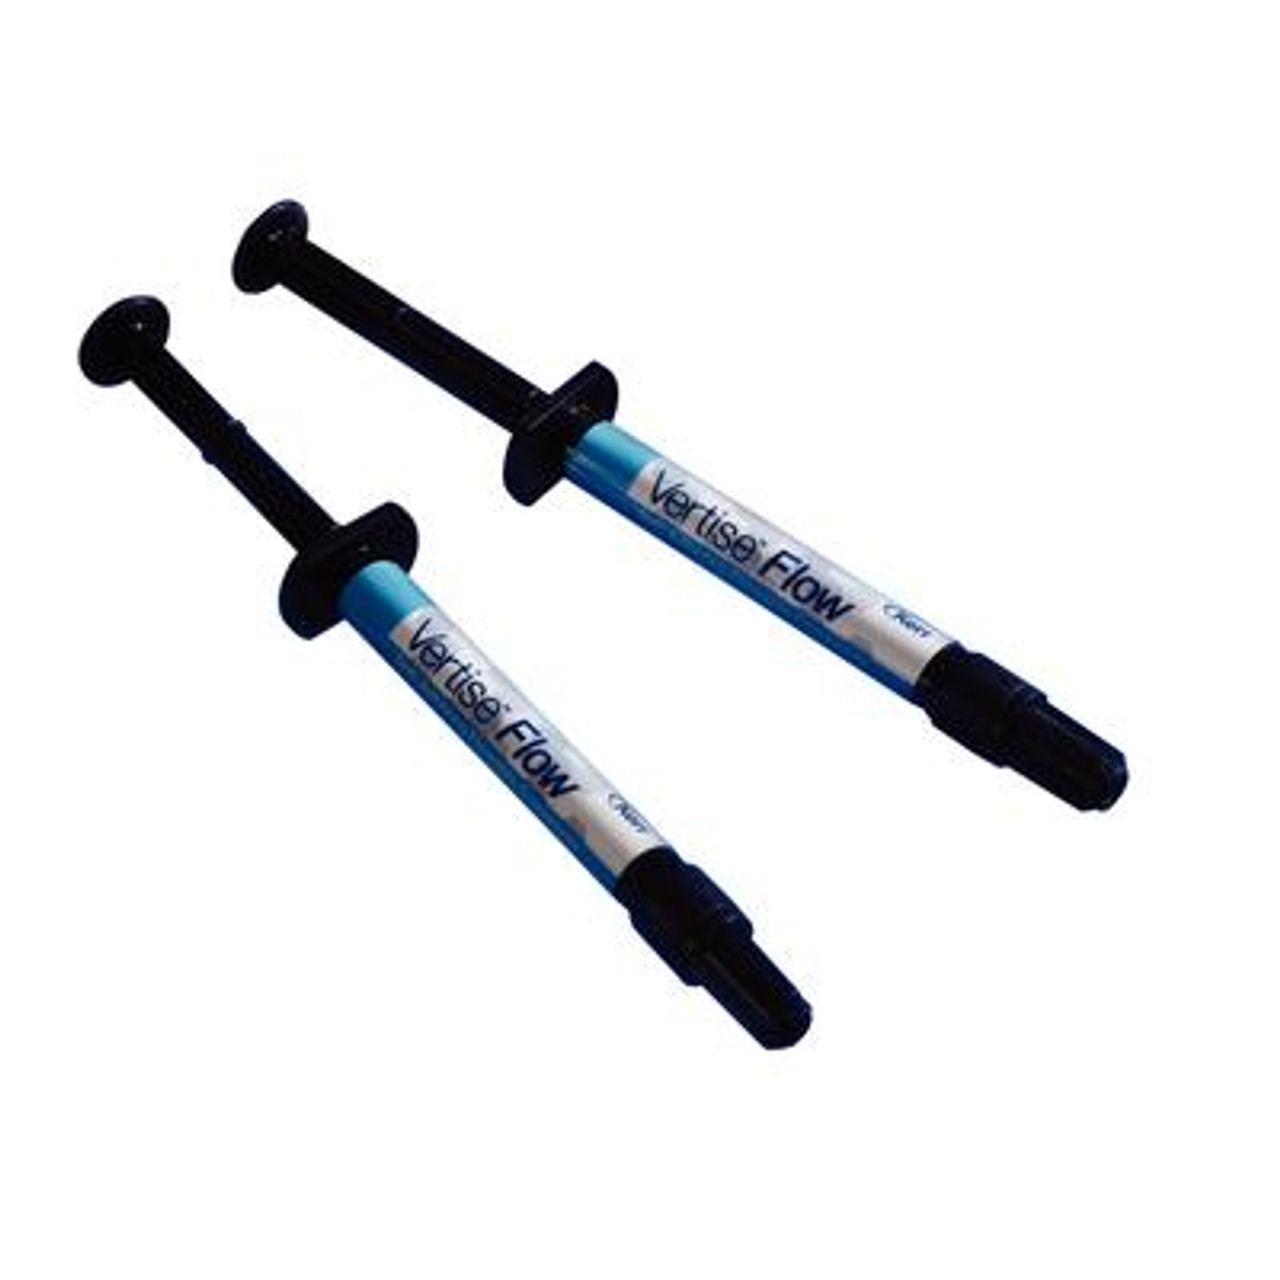 Vertise Flow Refills 2 Syringes (2 g each) A2, 34242 by DDS Dental Supplies